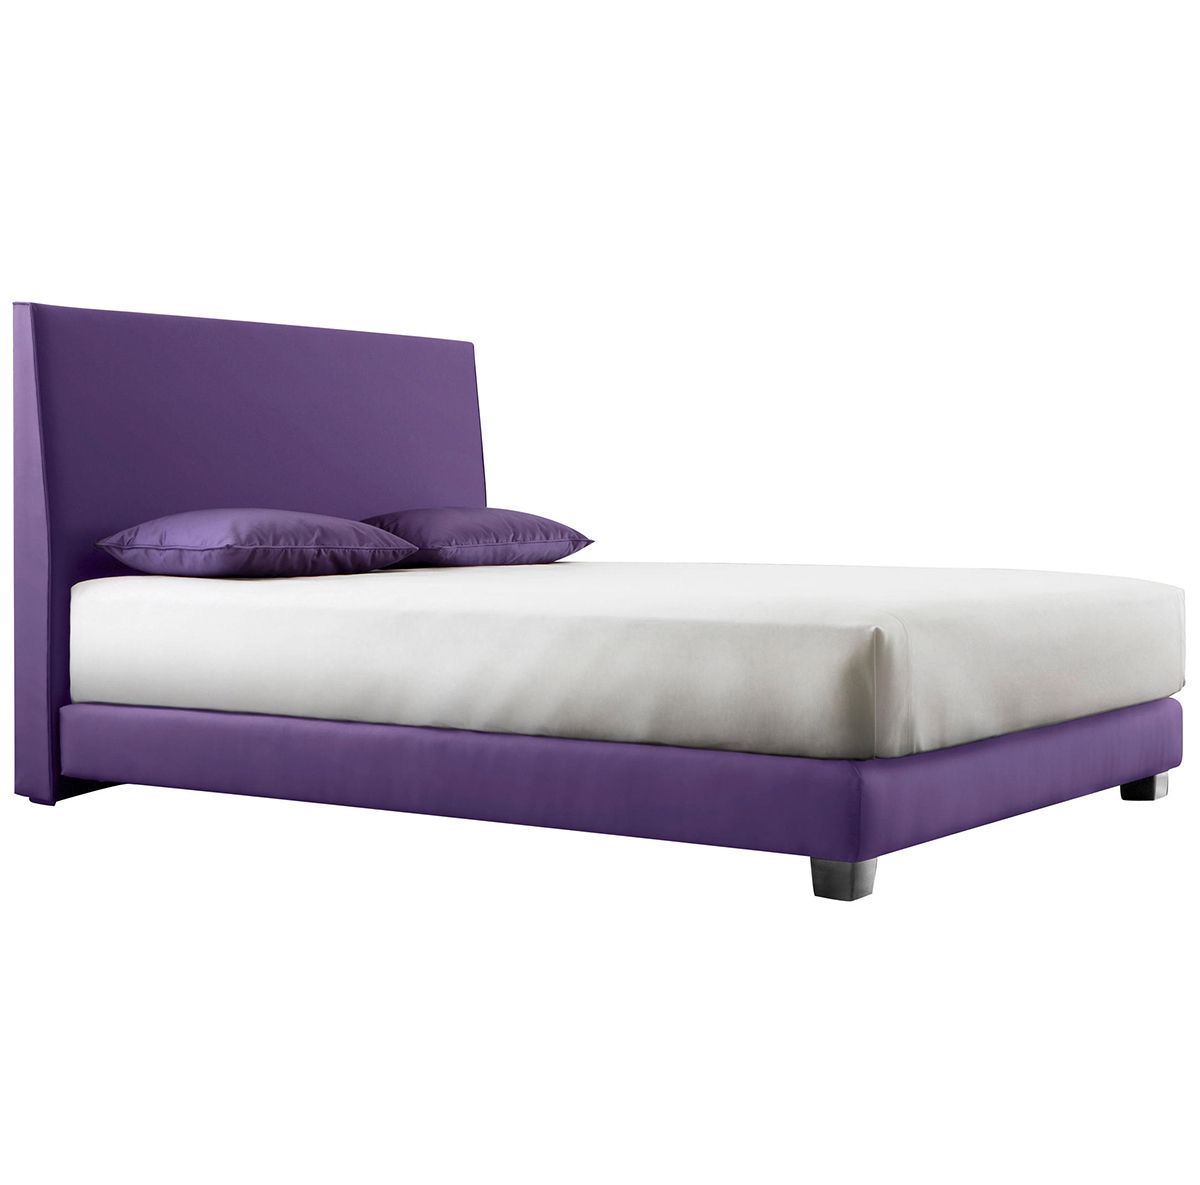 Single bed with upholstered headboard 90x200 cm purple Collection Prestige